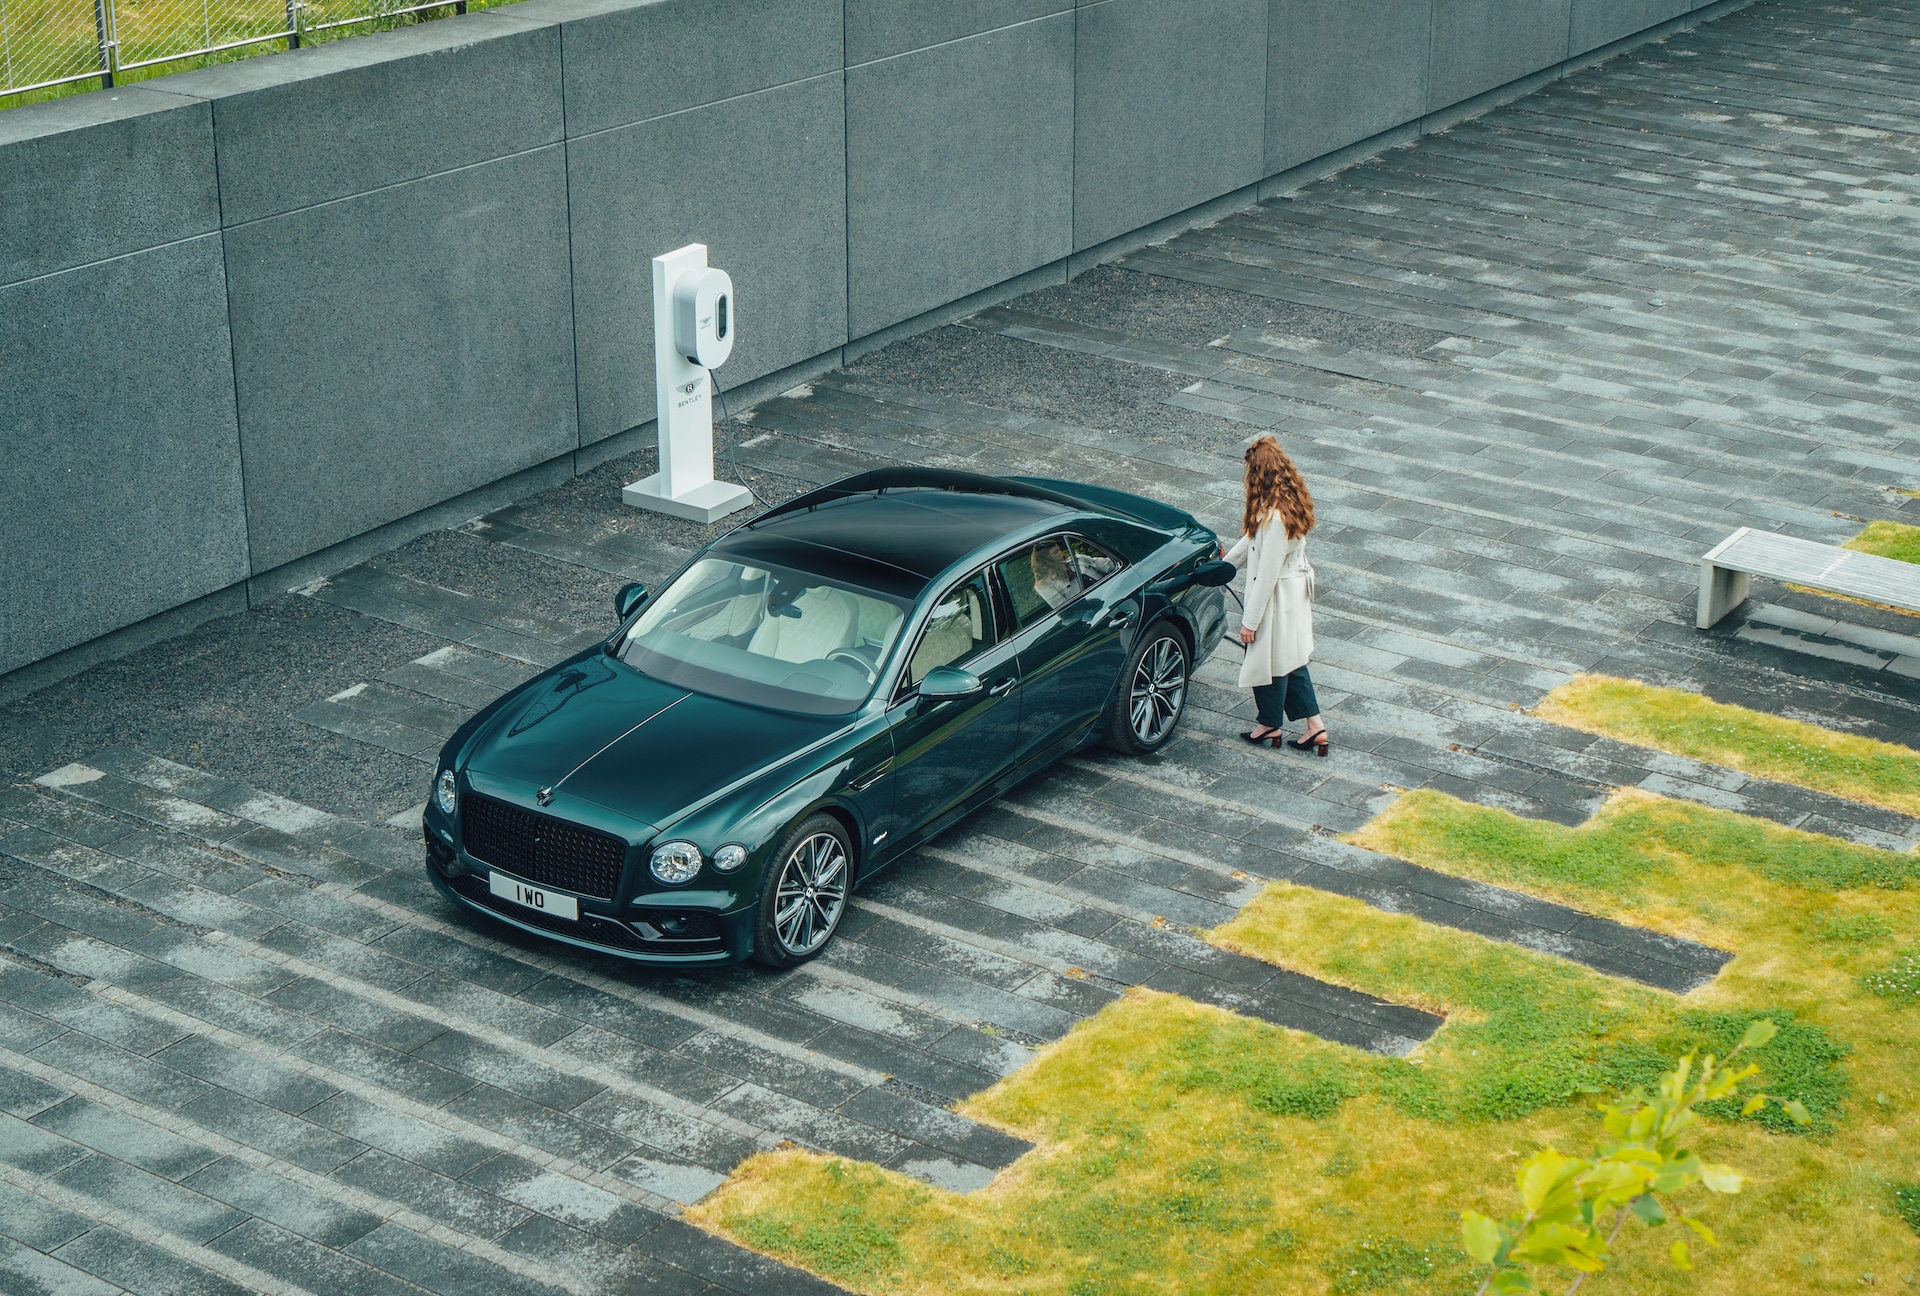 Bentley Motors Announces Recruitment Drive to Support Electric Vehicle Development and Sustainable Luxury Mobility